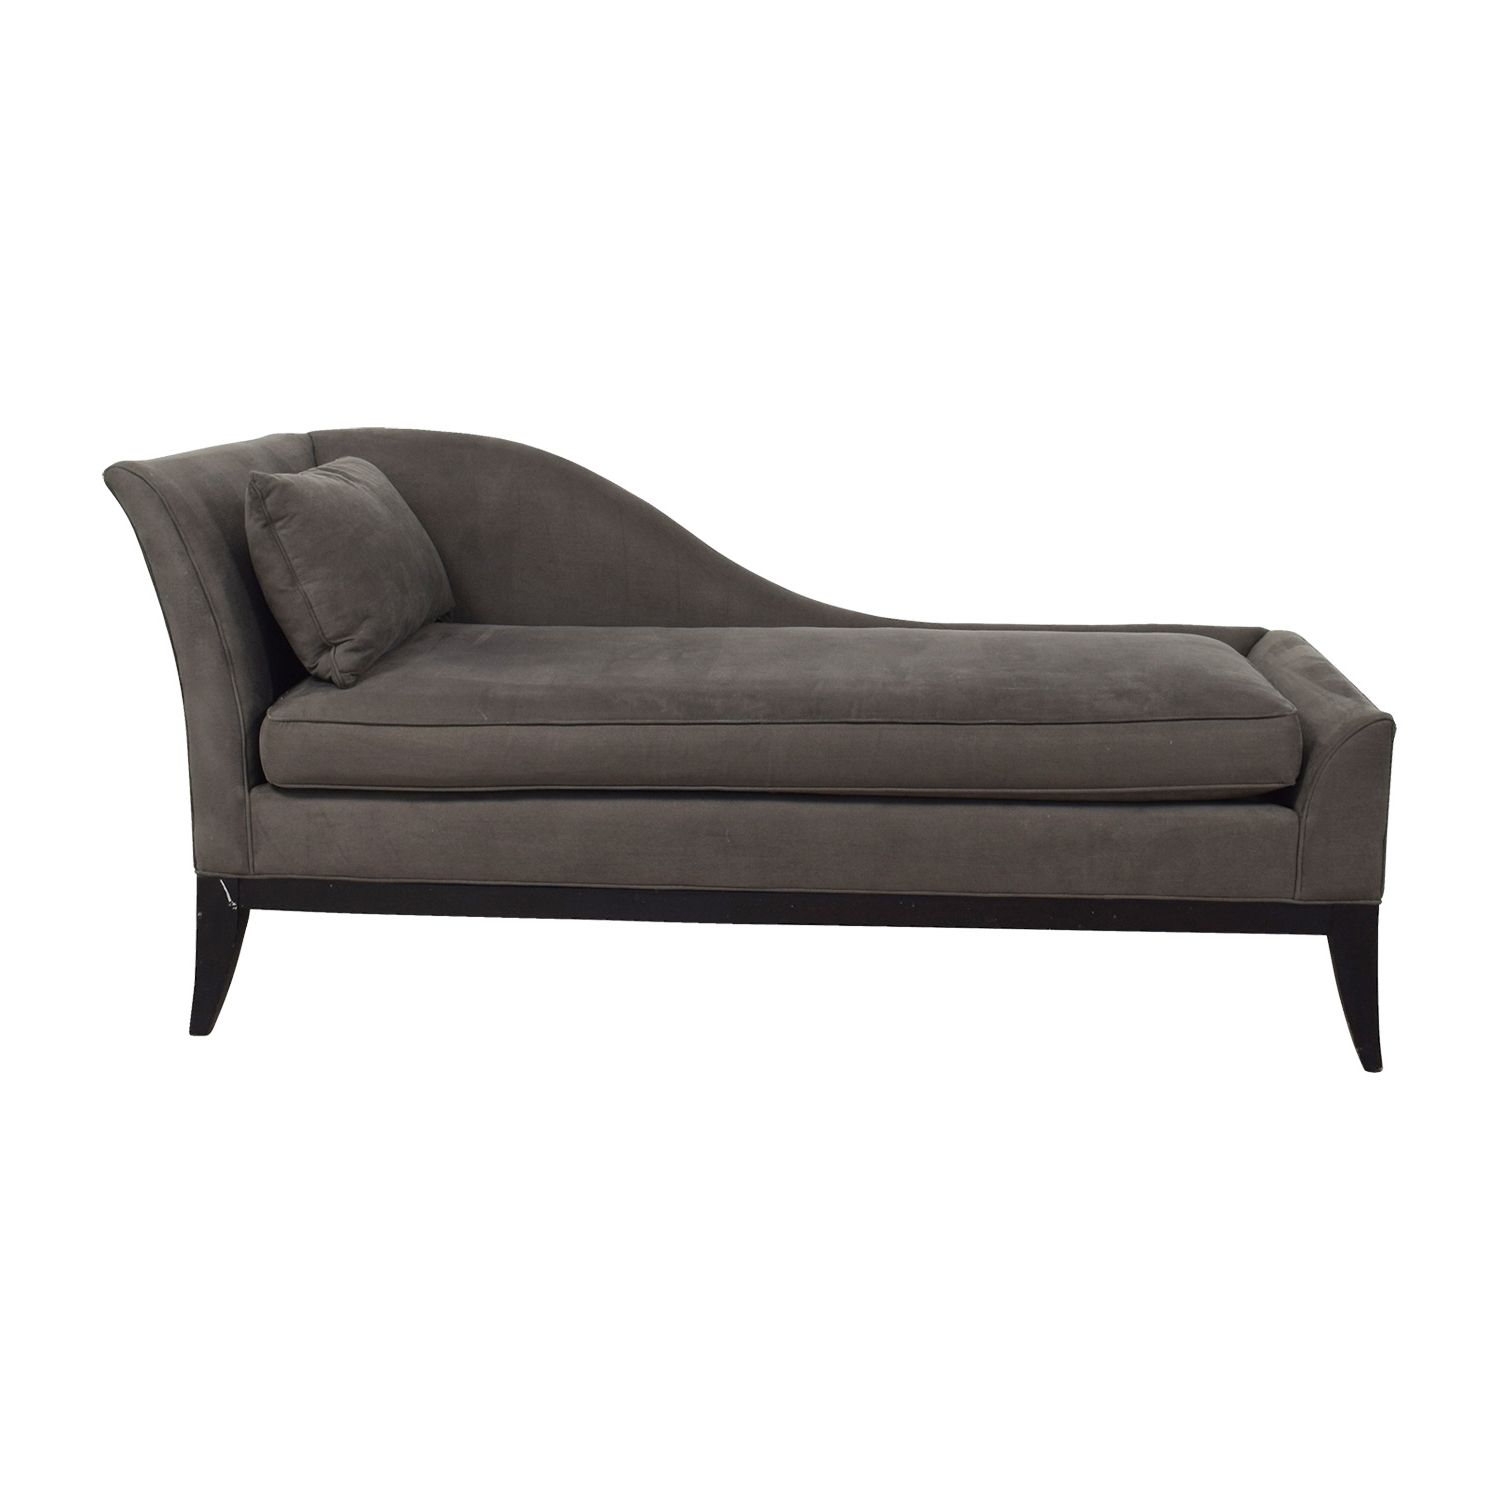 [%78% Off – Grey Chaise Lounge / Sofas Inside 2018 Grey Chaise Lounge Chairs|grey Chaise Lounge Chairs With Latest 78% Off – Grey Chaise Lounge / Sofas|most Up To Date Grey Chaise Lounge Chairs With Regard To 78% Off – Grey Chaise Lounge / Sofas|newest 78% Off – Grey Chaise Lounge / Sofas Intended For Grey Chaise Lounge Chairs%] (View 14 of 15)